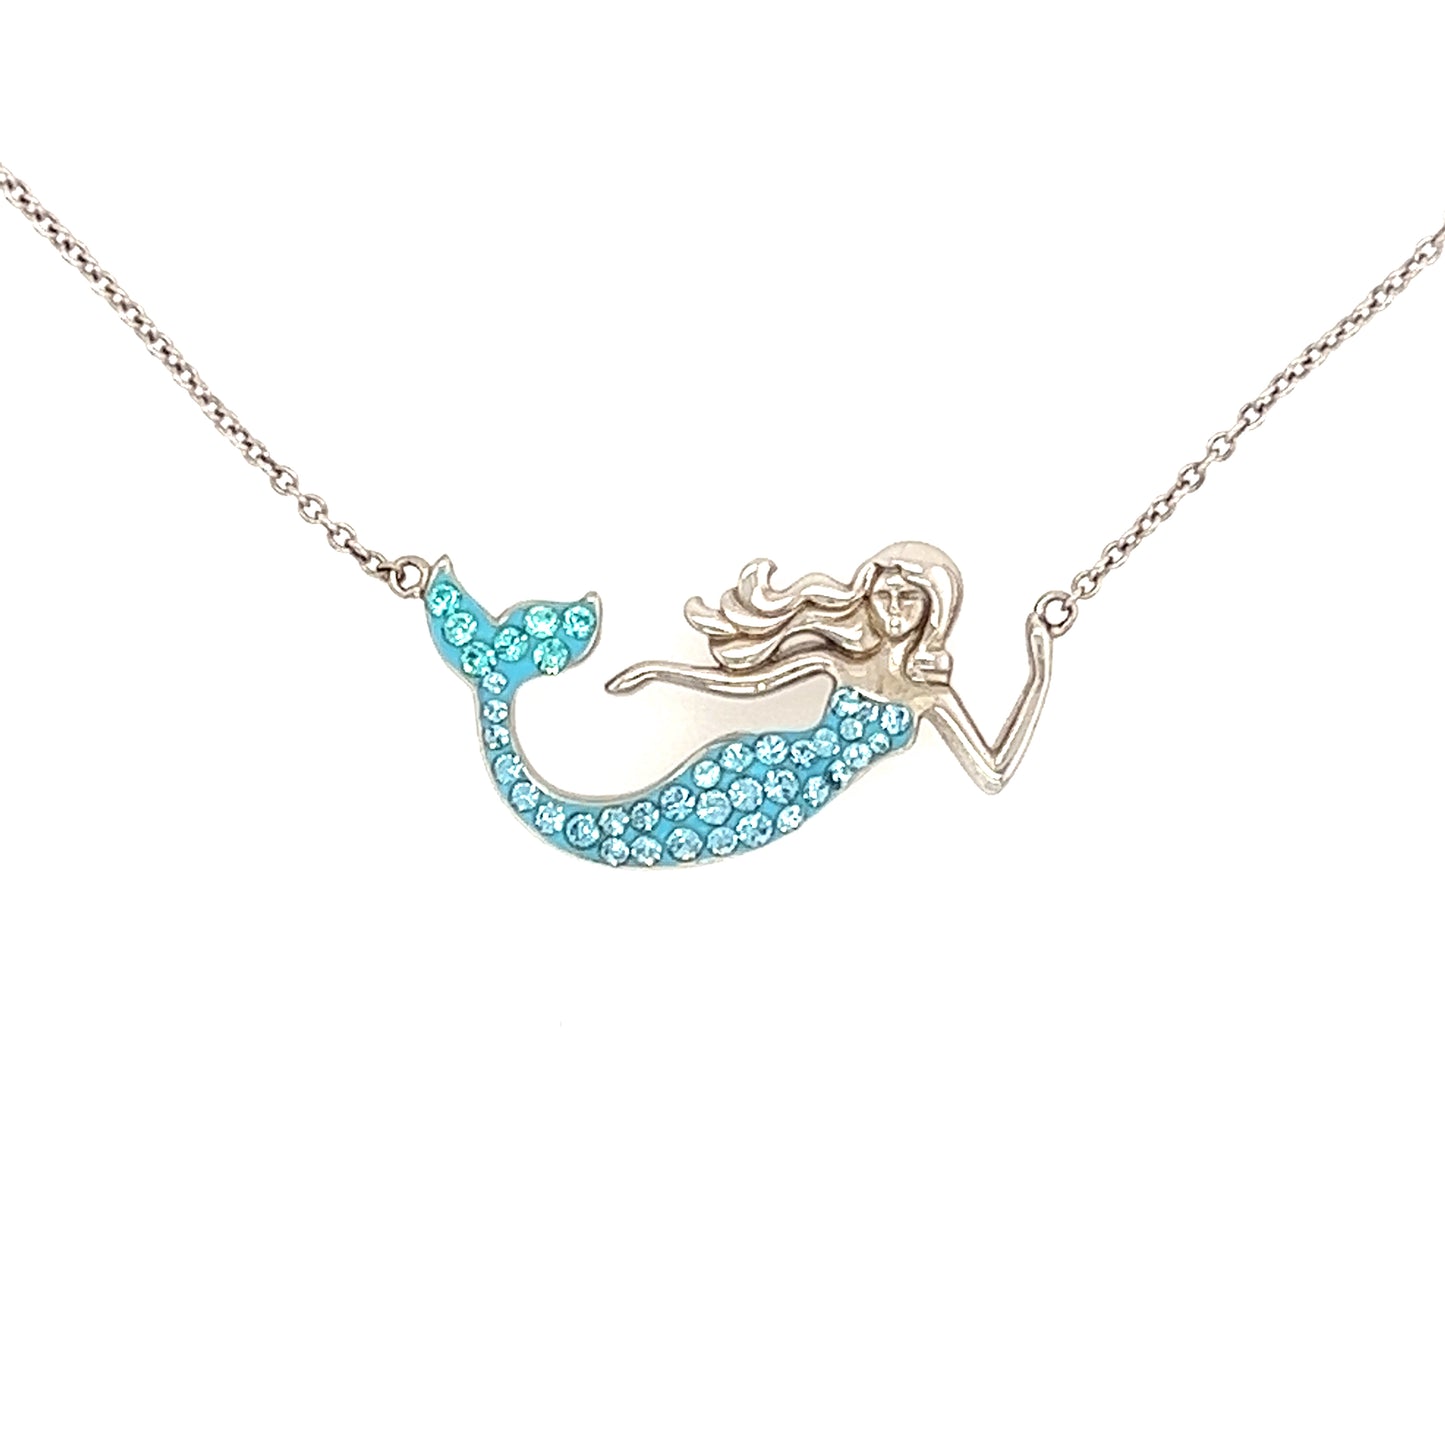 Mermaid Necklace in Sterling Silver Front Mermaid View